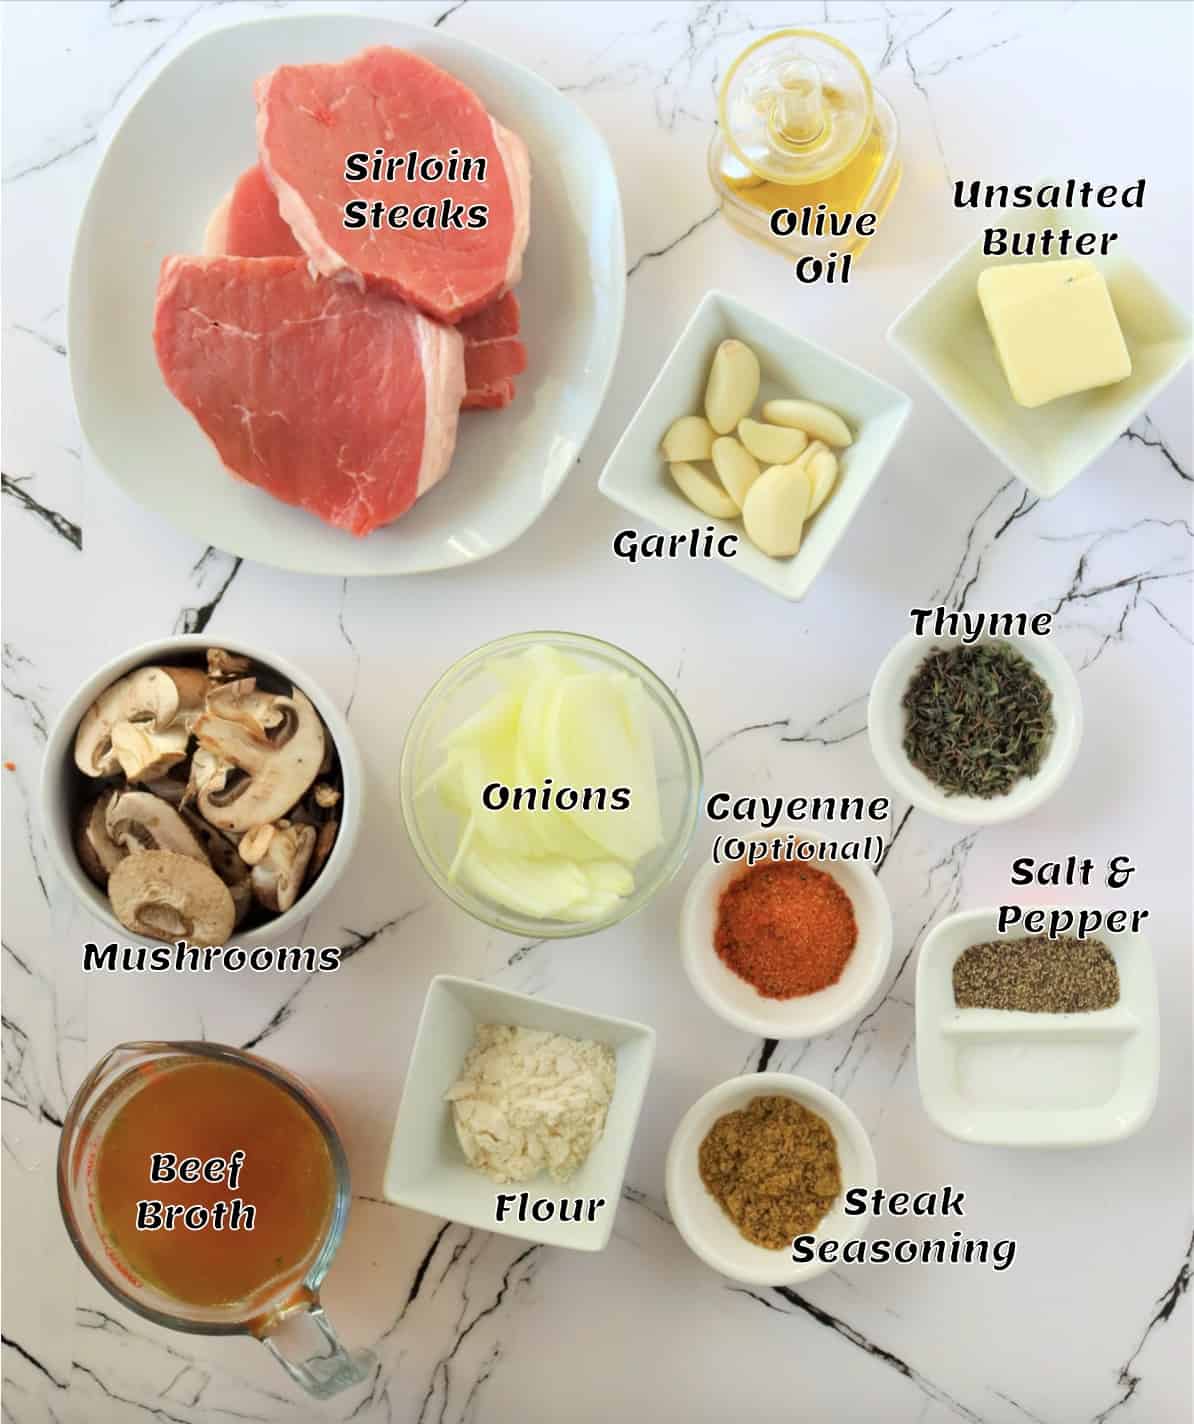 What you need for grilled steak